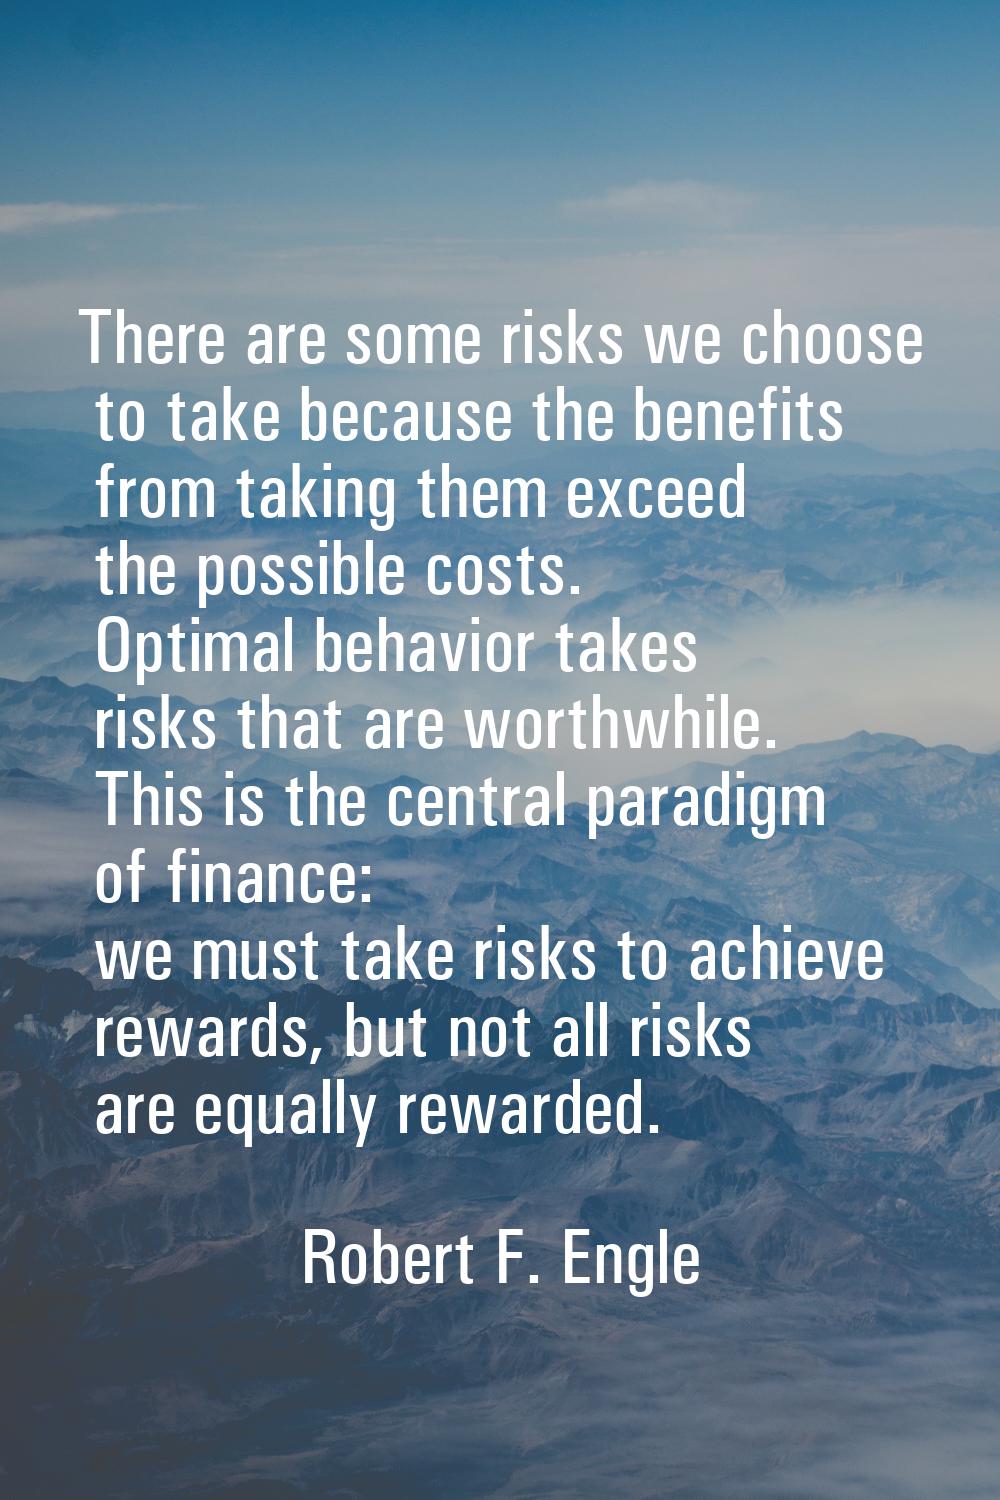 There are some risks we choose to take because the benefits from taking them exceed the possible co